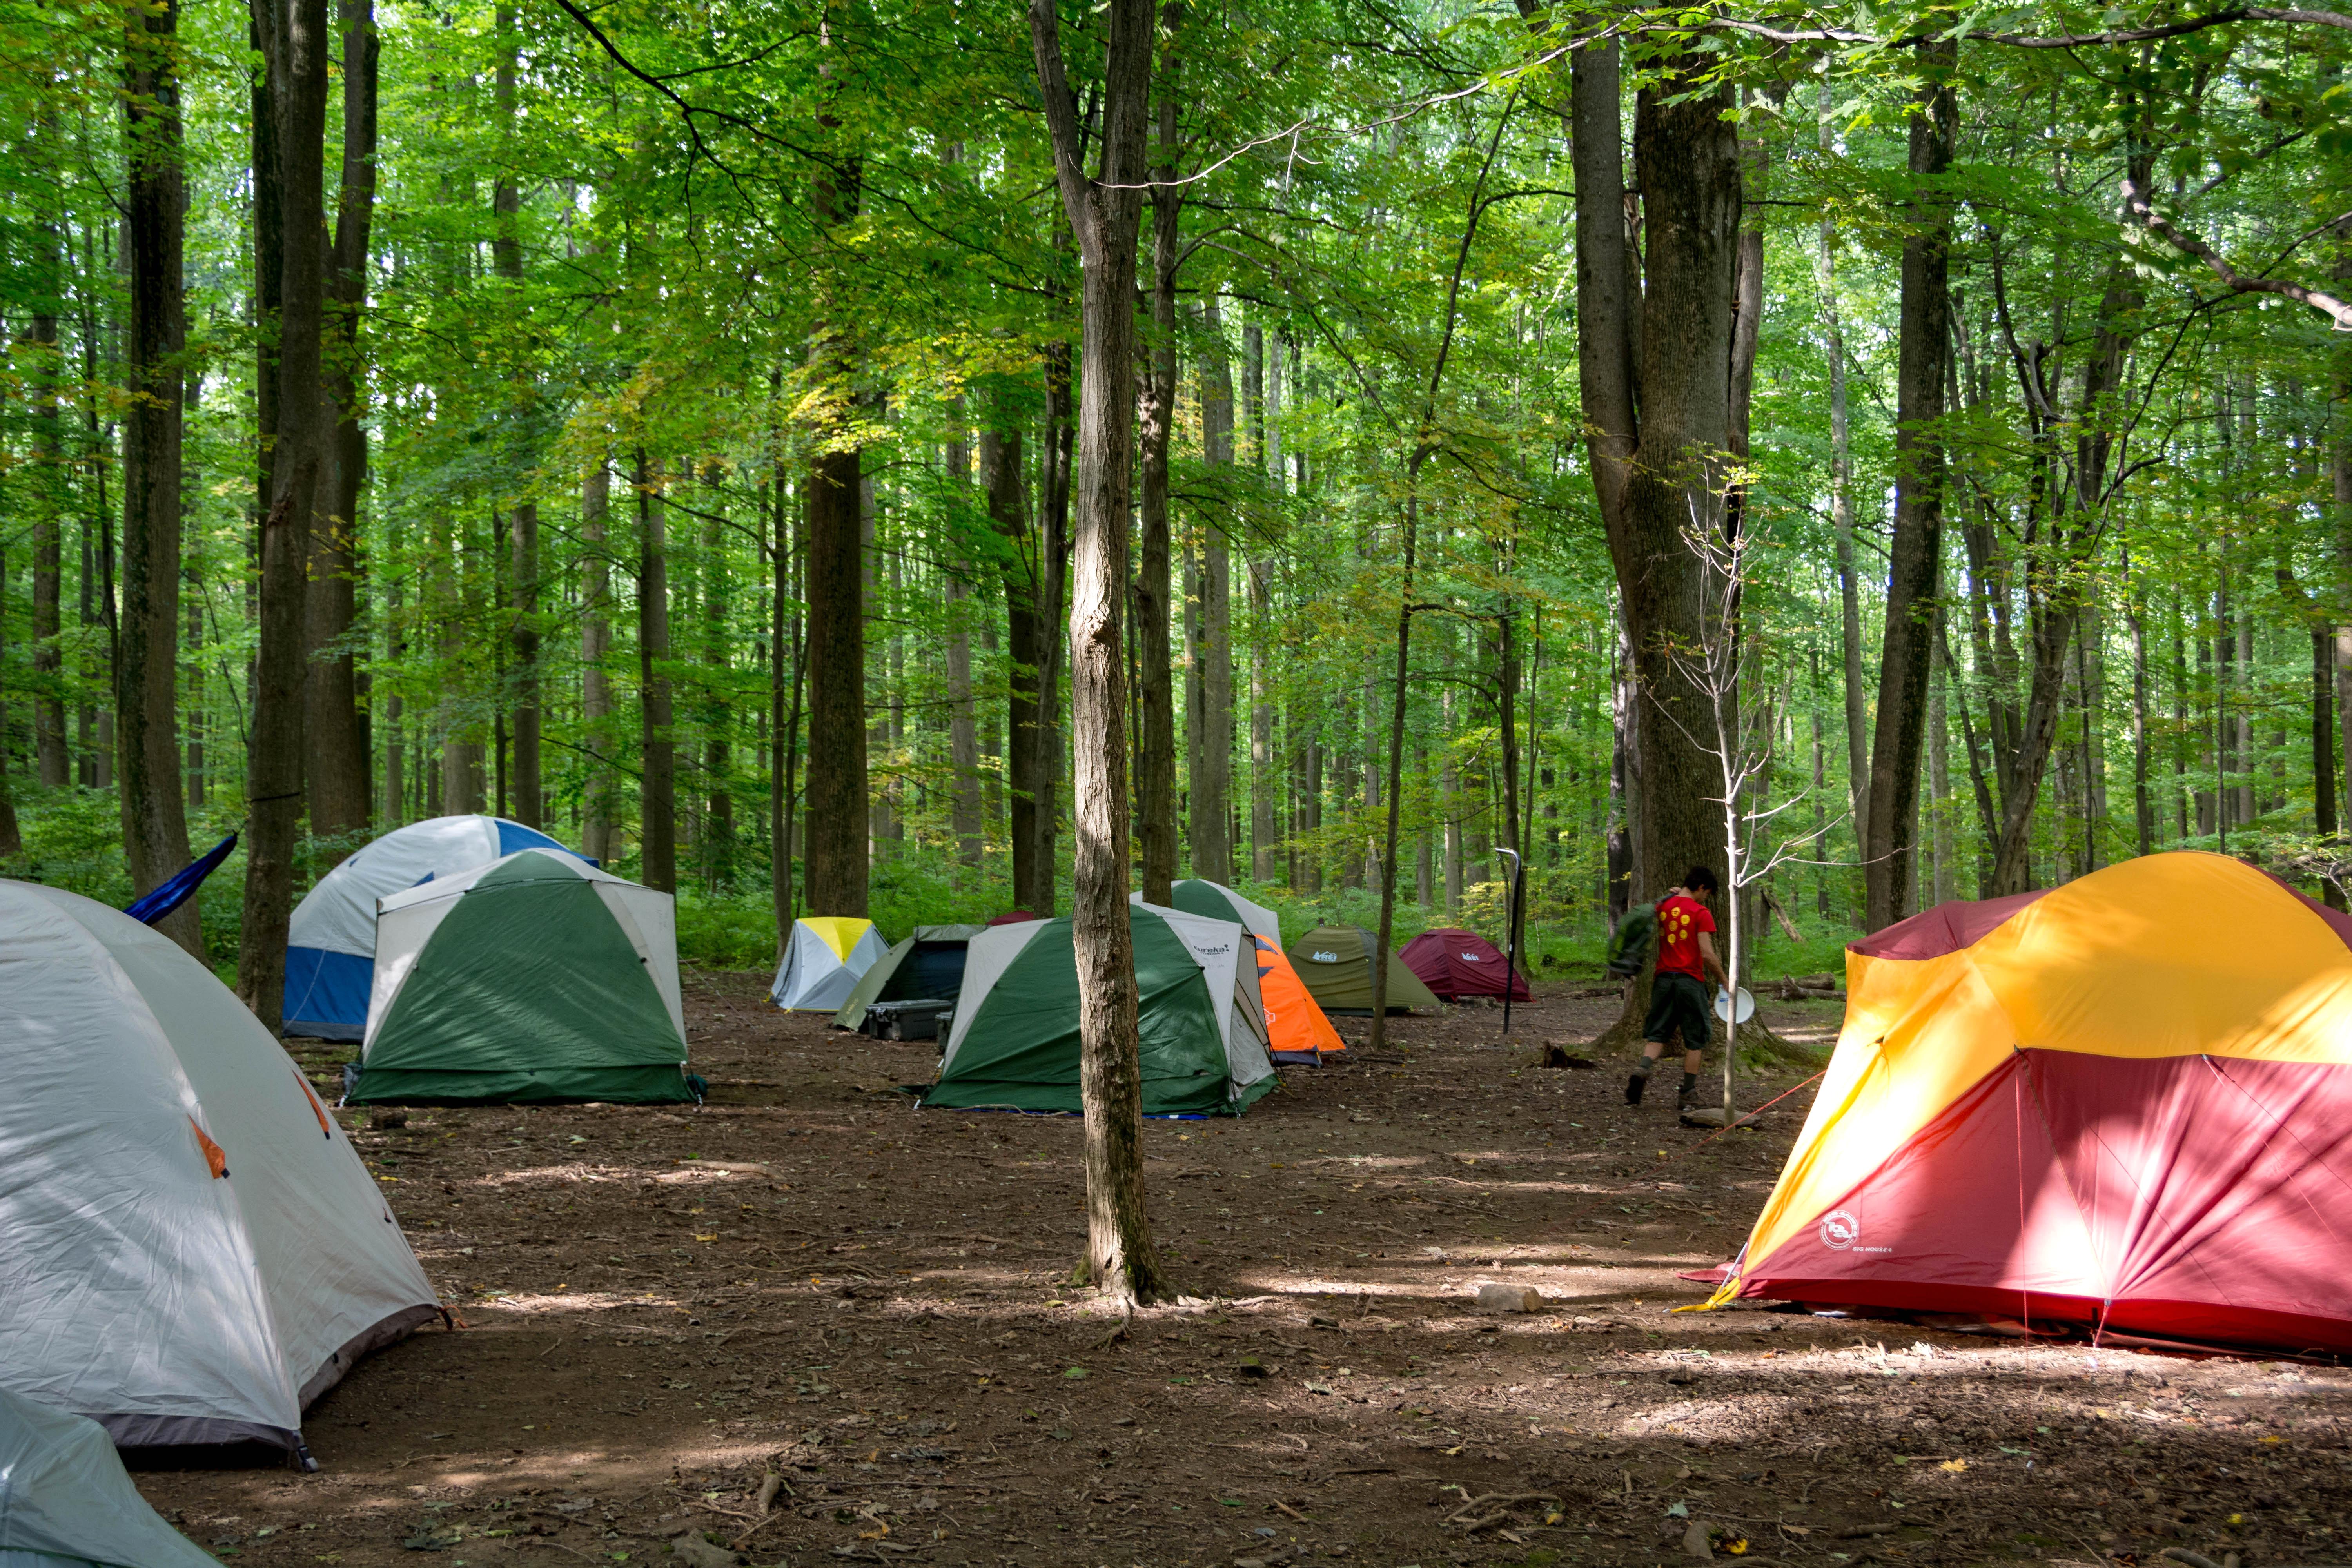 Numerous tents set up under forest canopy